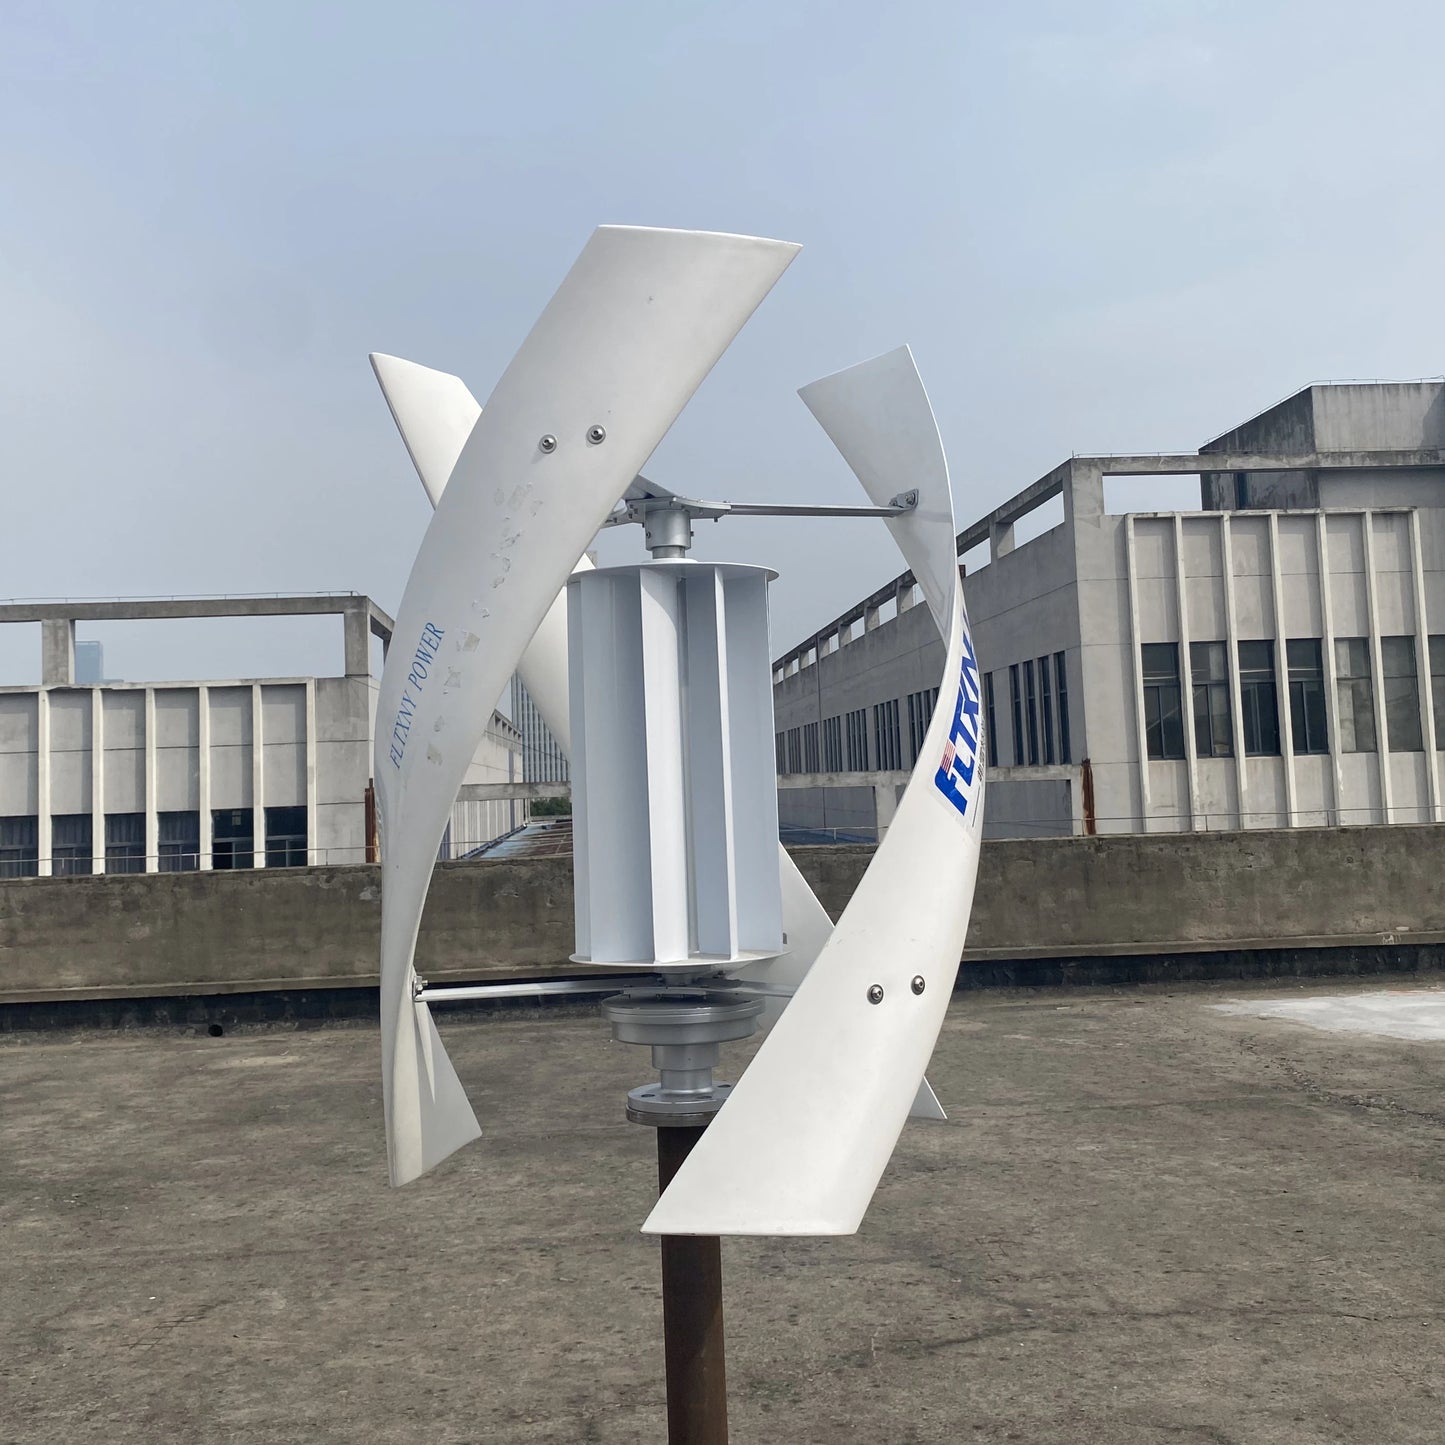 Wind Generator 1000W 2000W Inner Air Duct Small Free Energy Wind Turbine Power Permanent Maglev 12V 24V With MPPT Controller